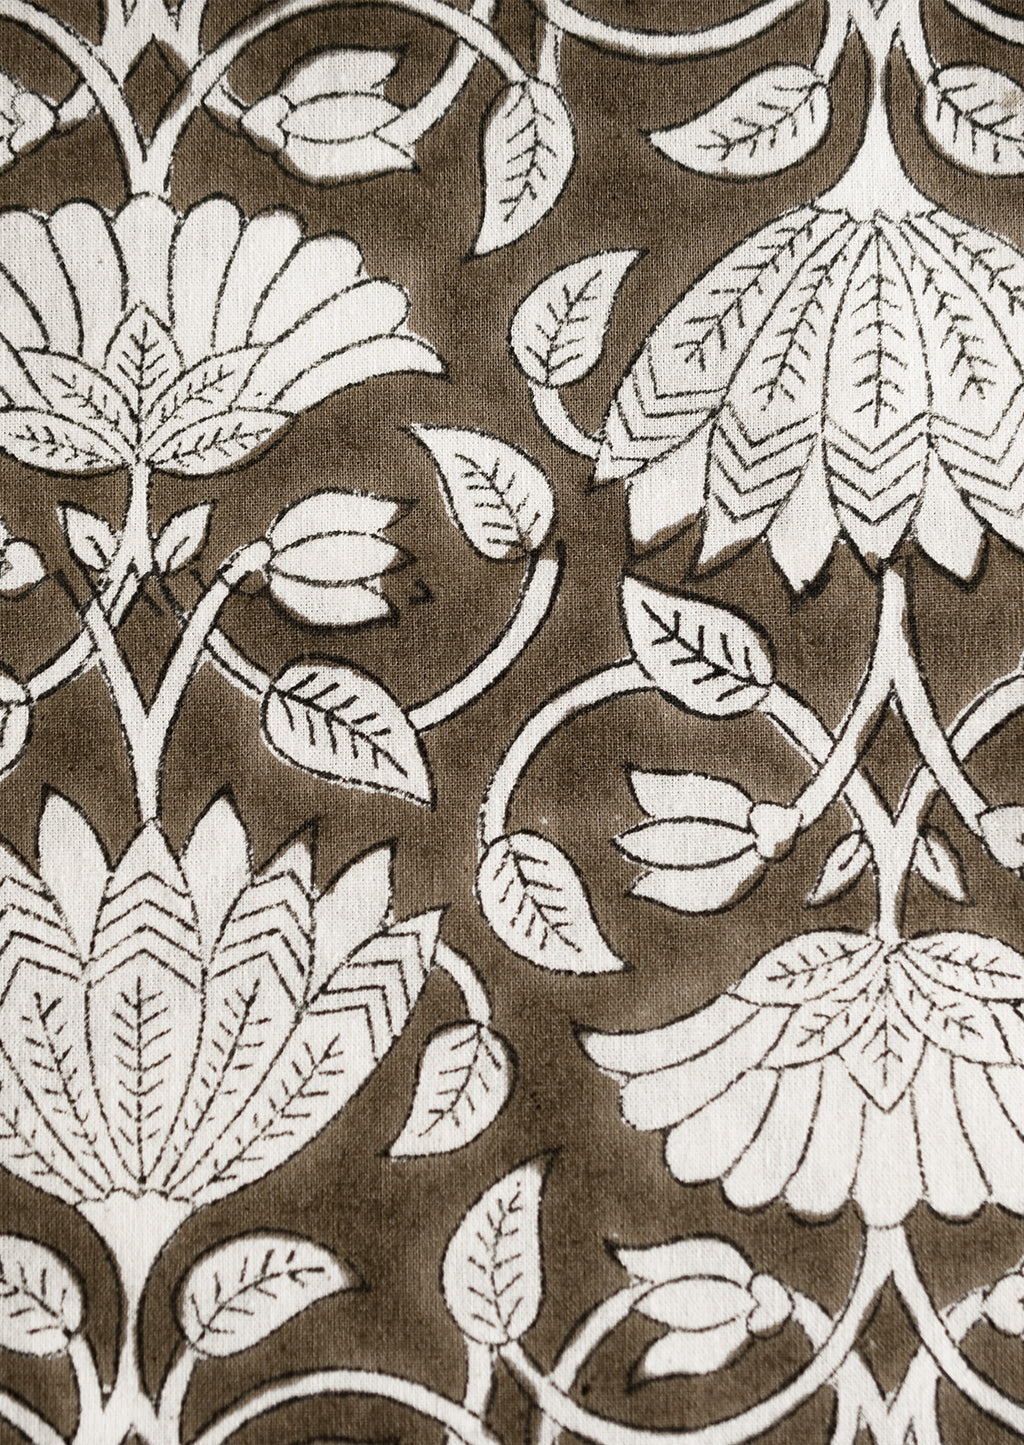 3: A block printed tablecloth with white lotus print on brown background.